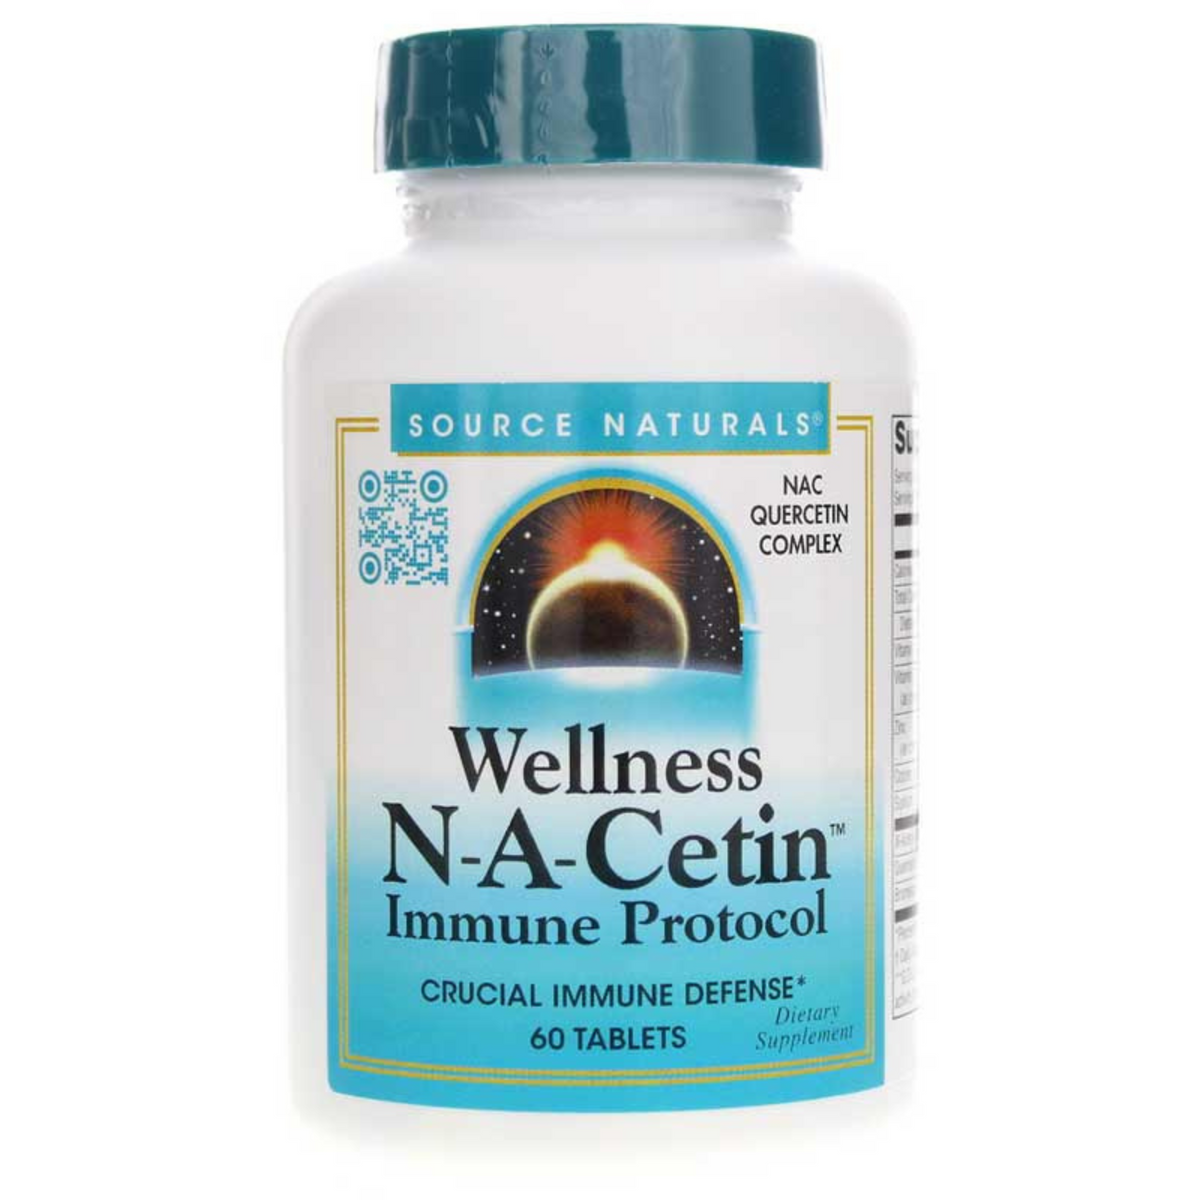 Primary Image of Source Naturals Wellness N-A-Cetin Tablets